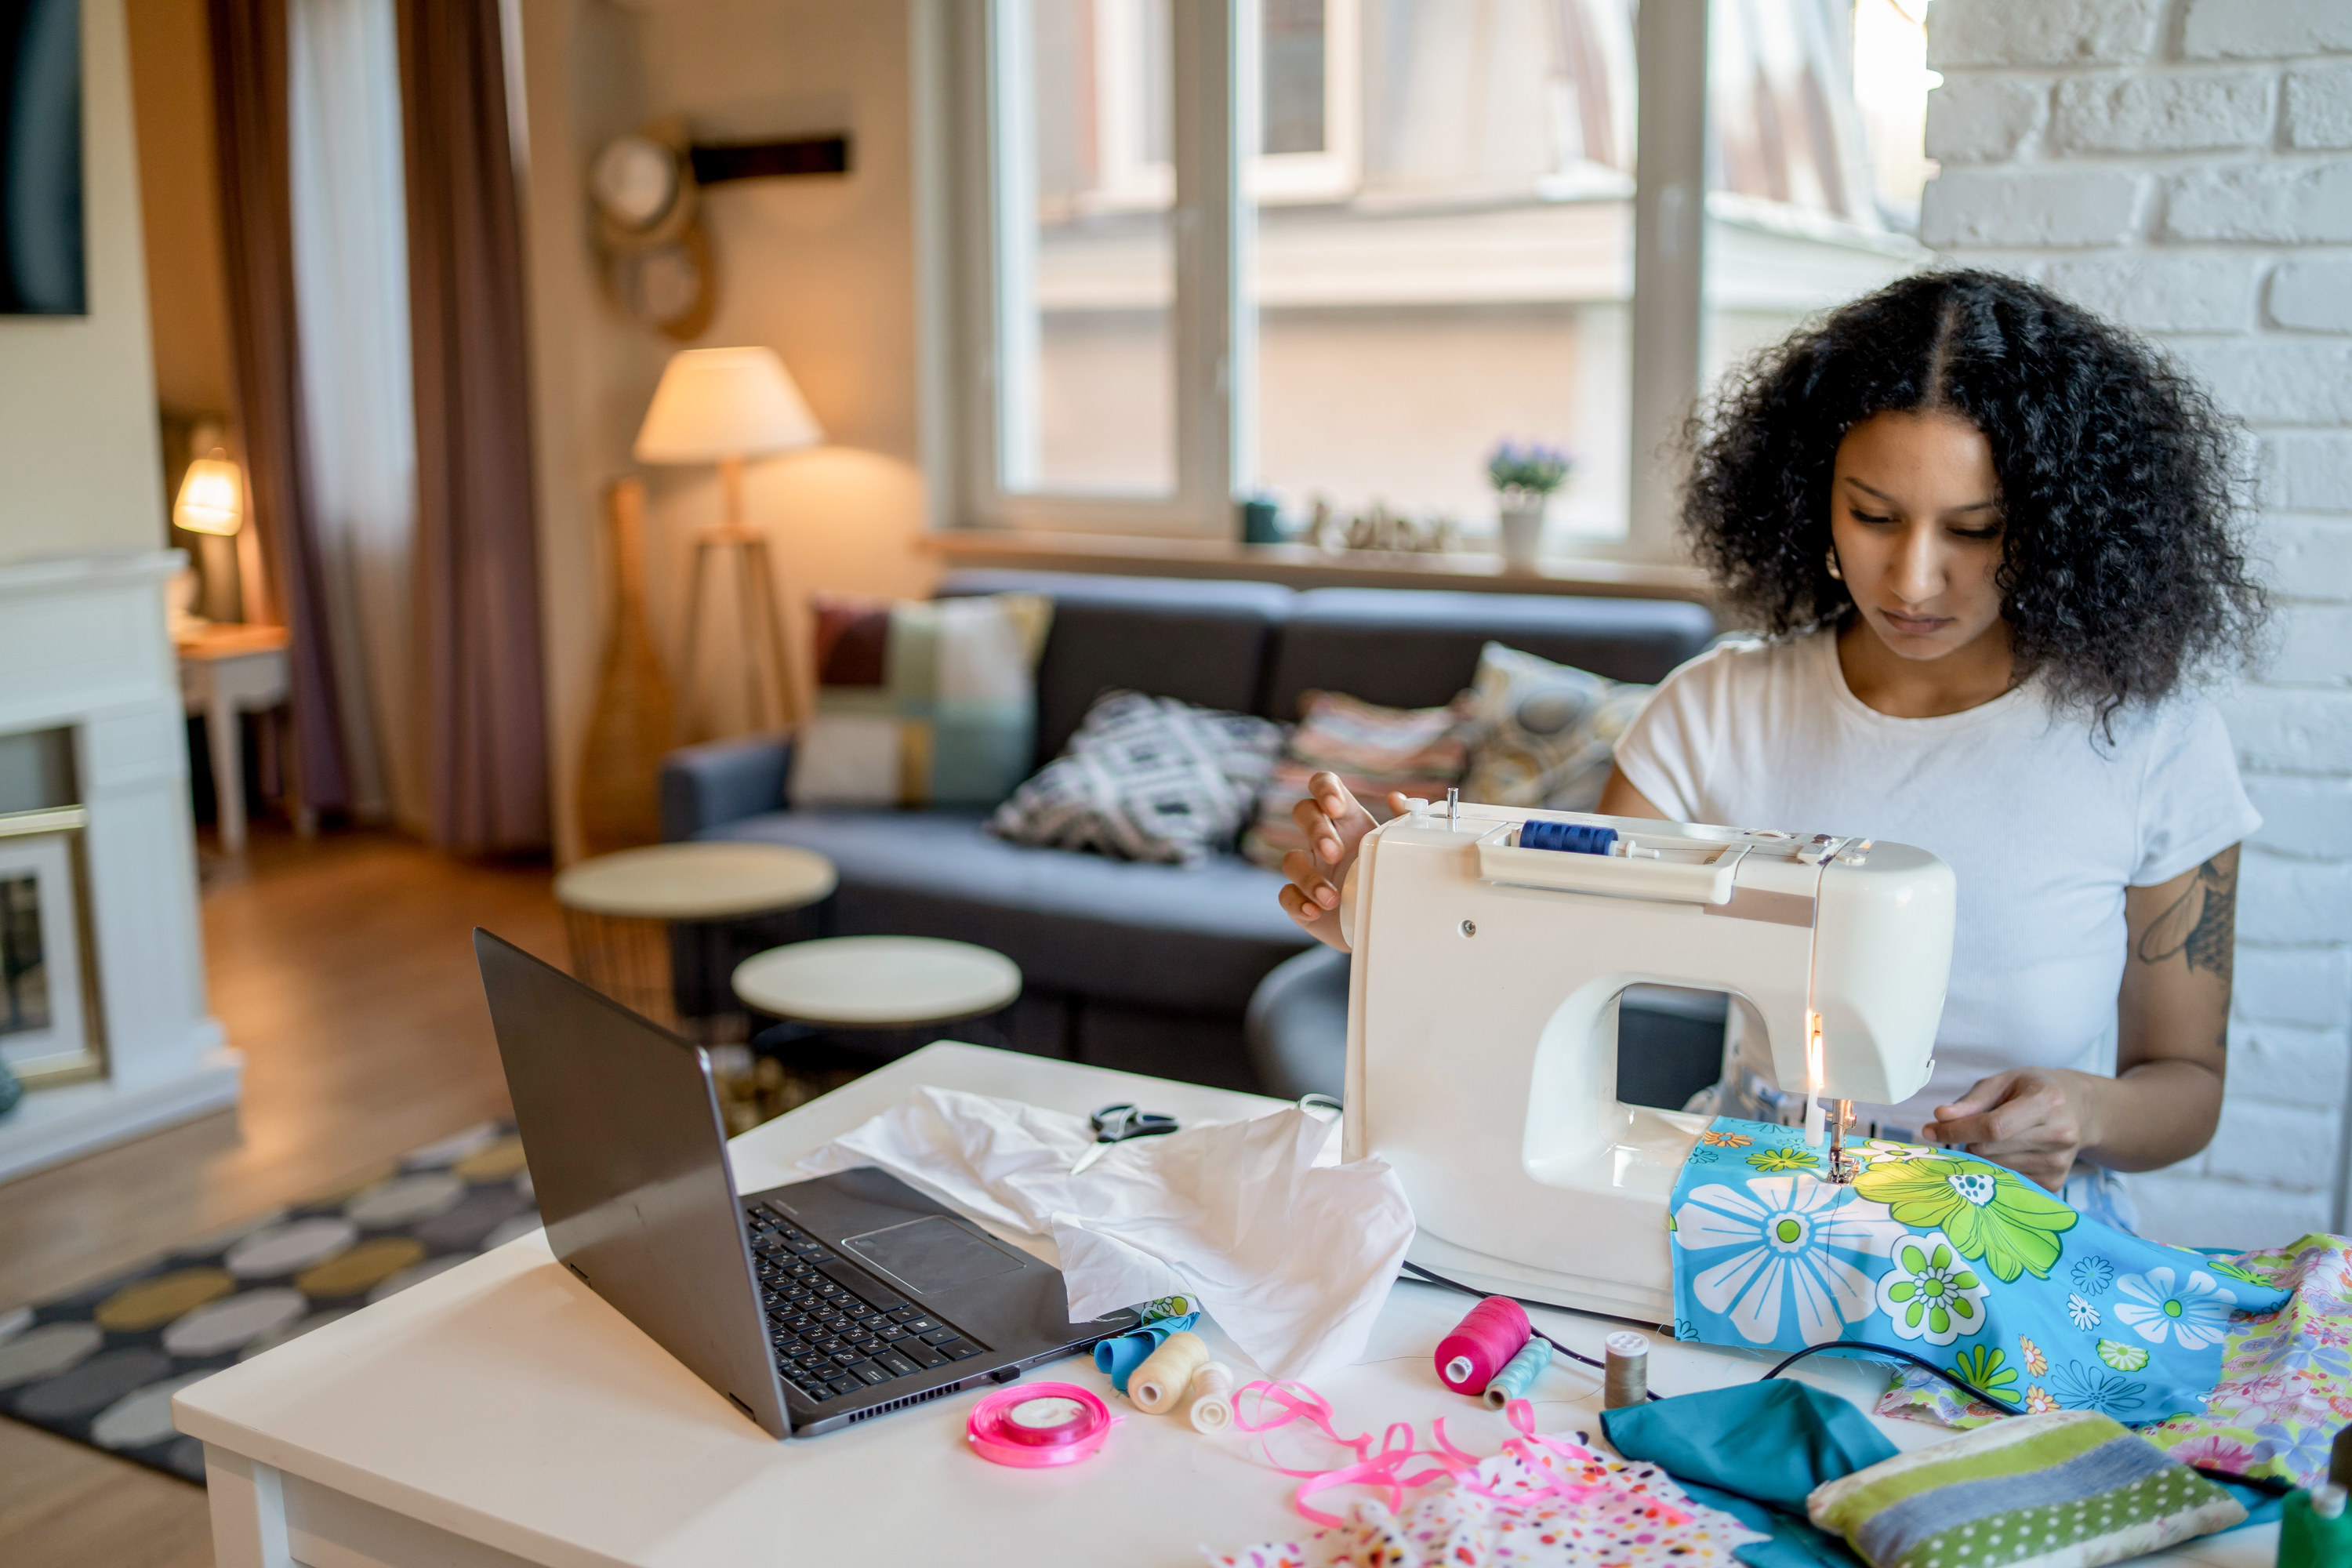 A seamstress is creating homemade items to sell on her online business